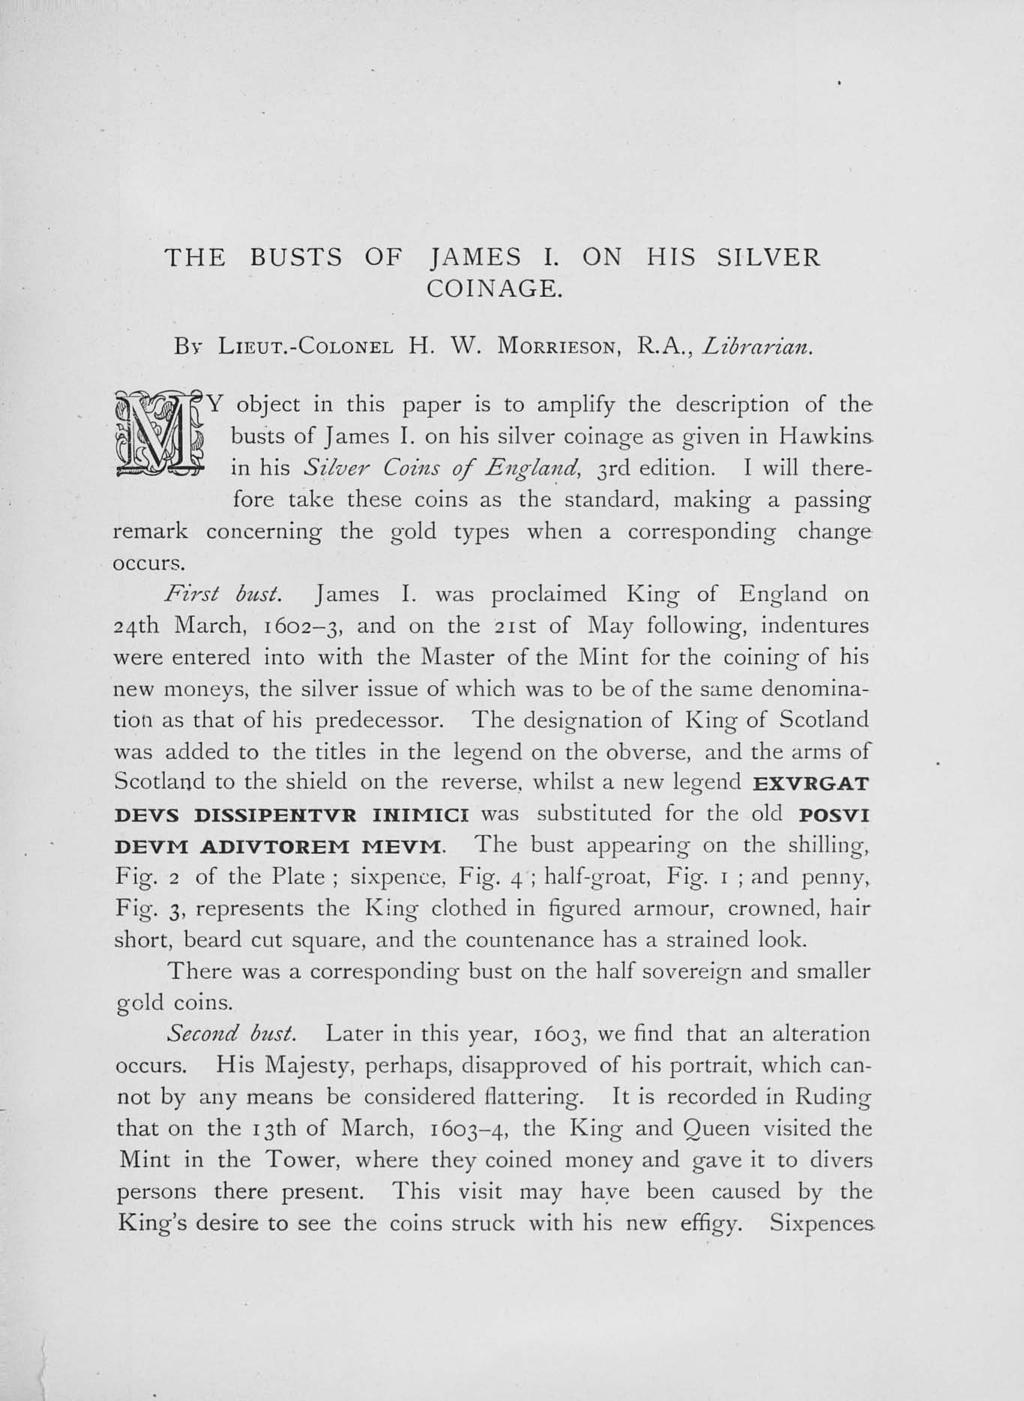 THE BUSTS OF JAMES I. ON HIS SILVER COINAGE. BY LIEUT.-COLONEL H. W. MORRIESON, R.A., Librarian. Y object in this paper is to amplify the description of the busts of James I.